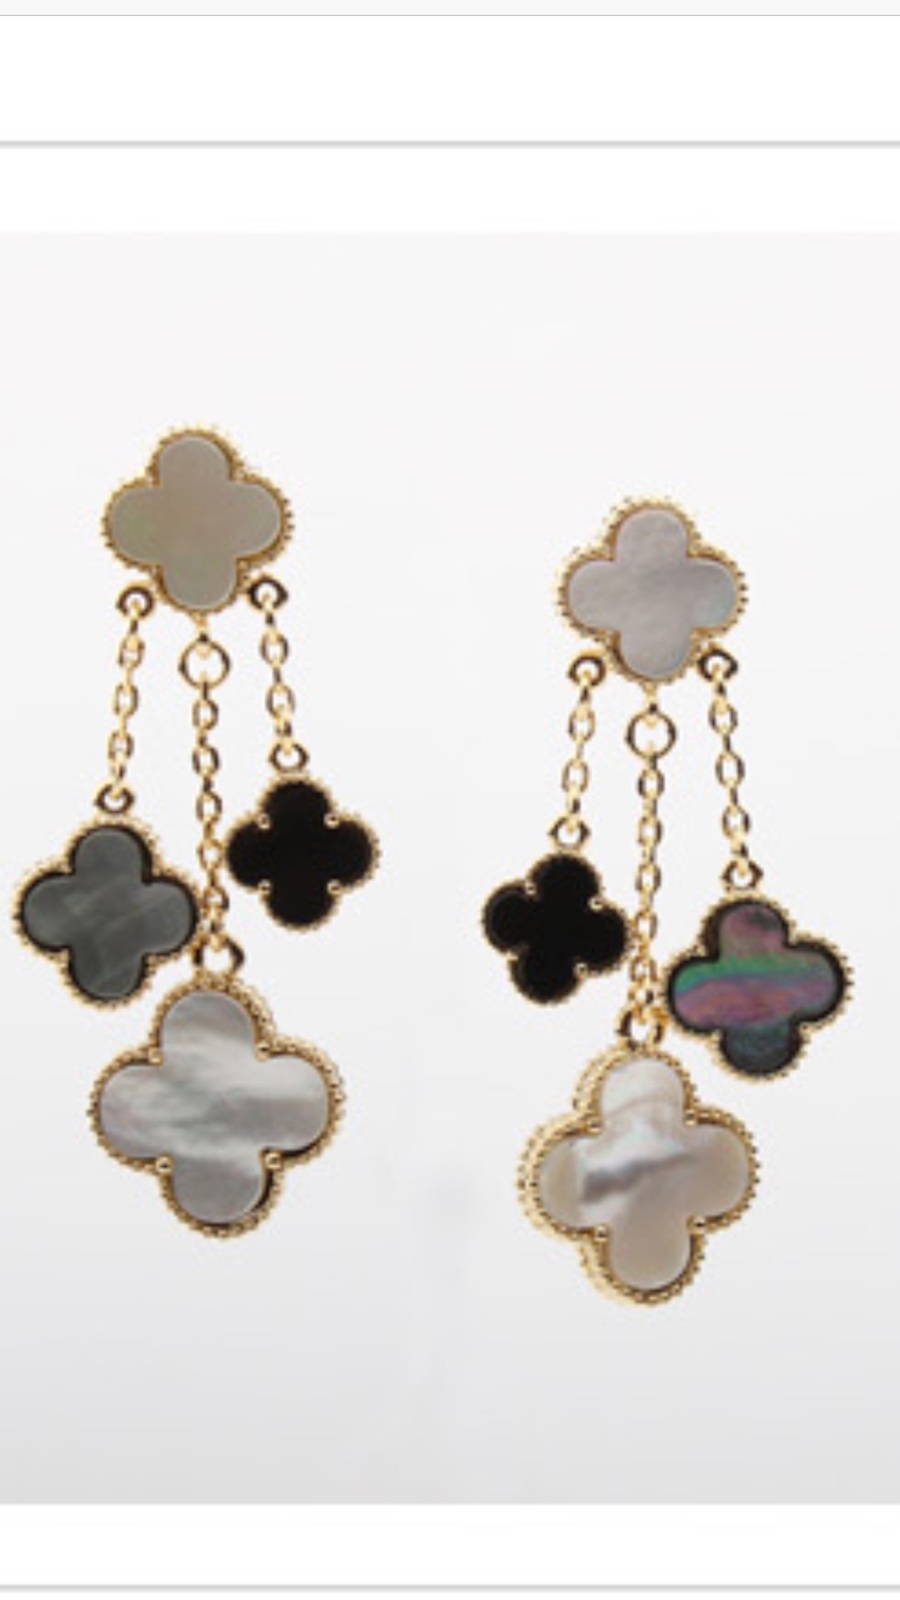 Primary image for Chandelier Mother of Pearl Earrings